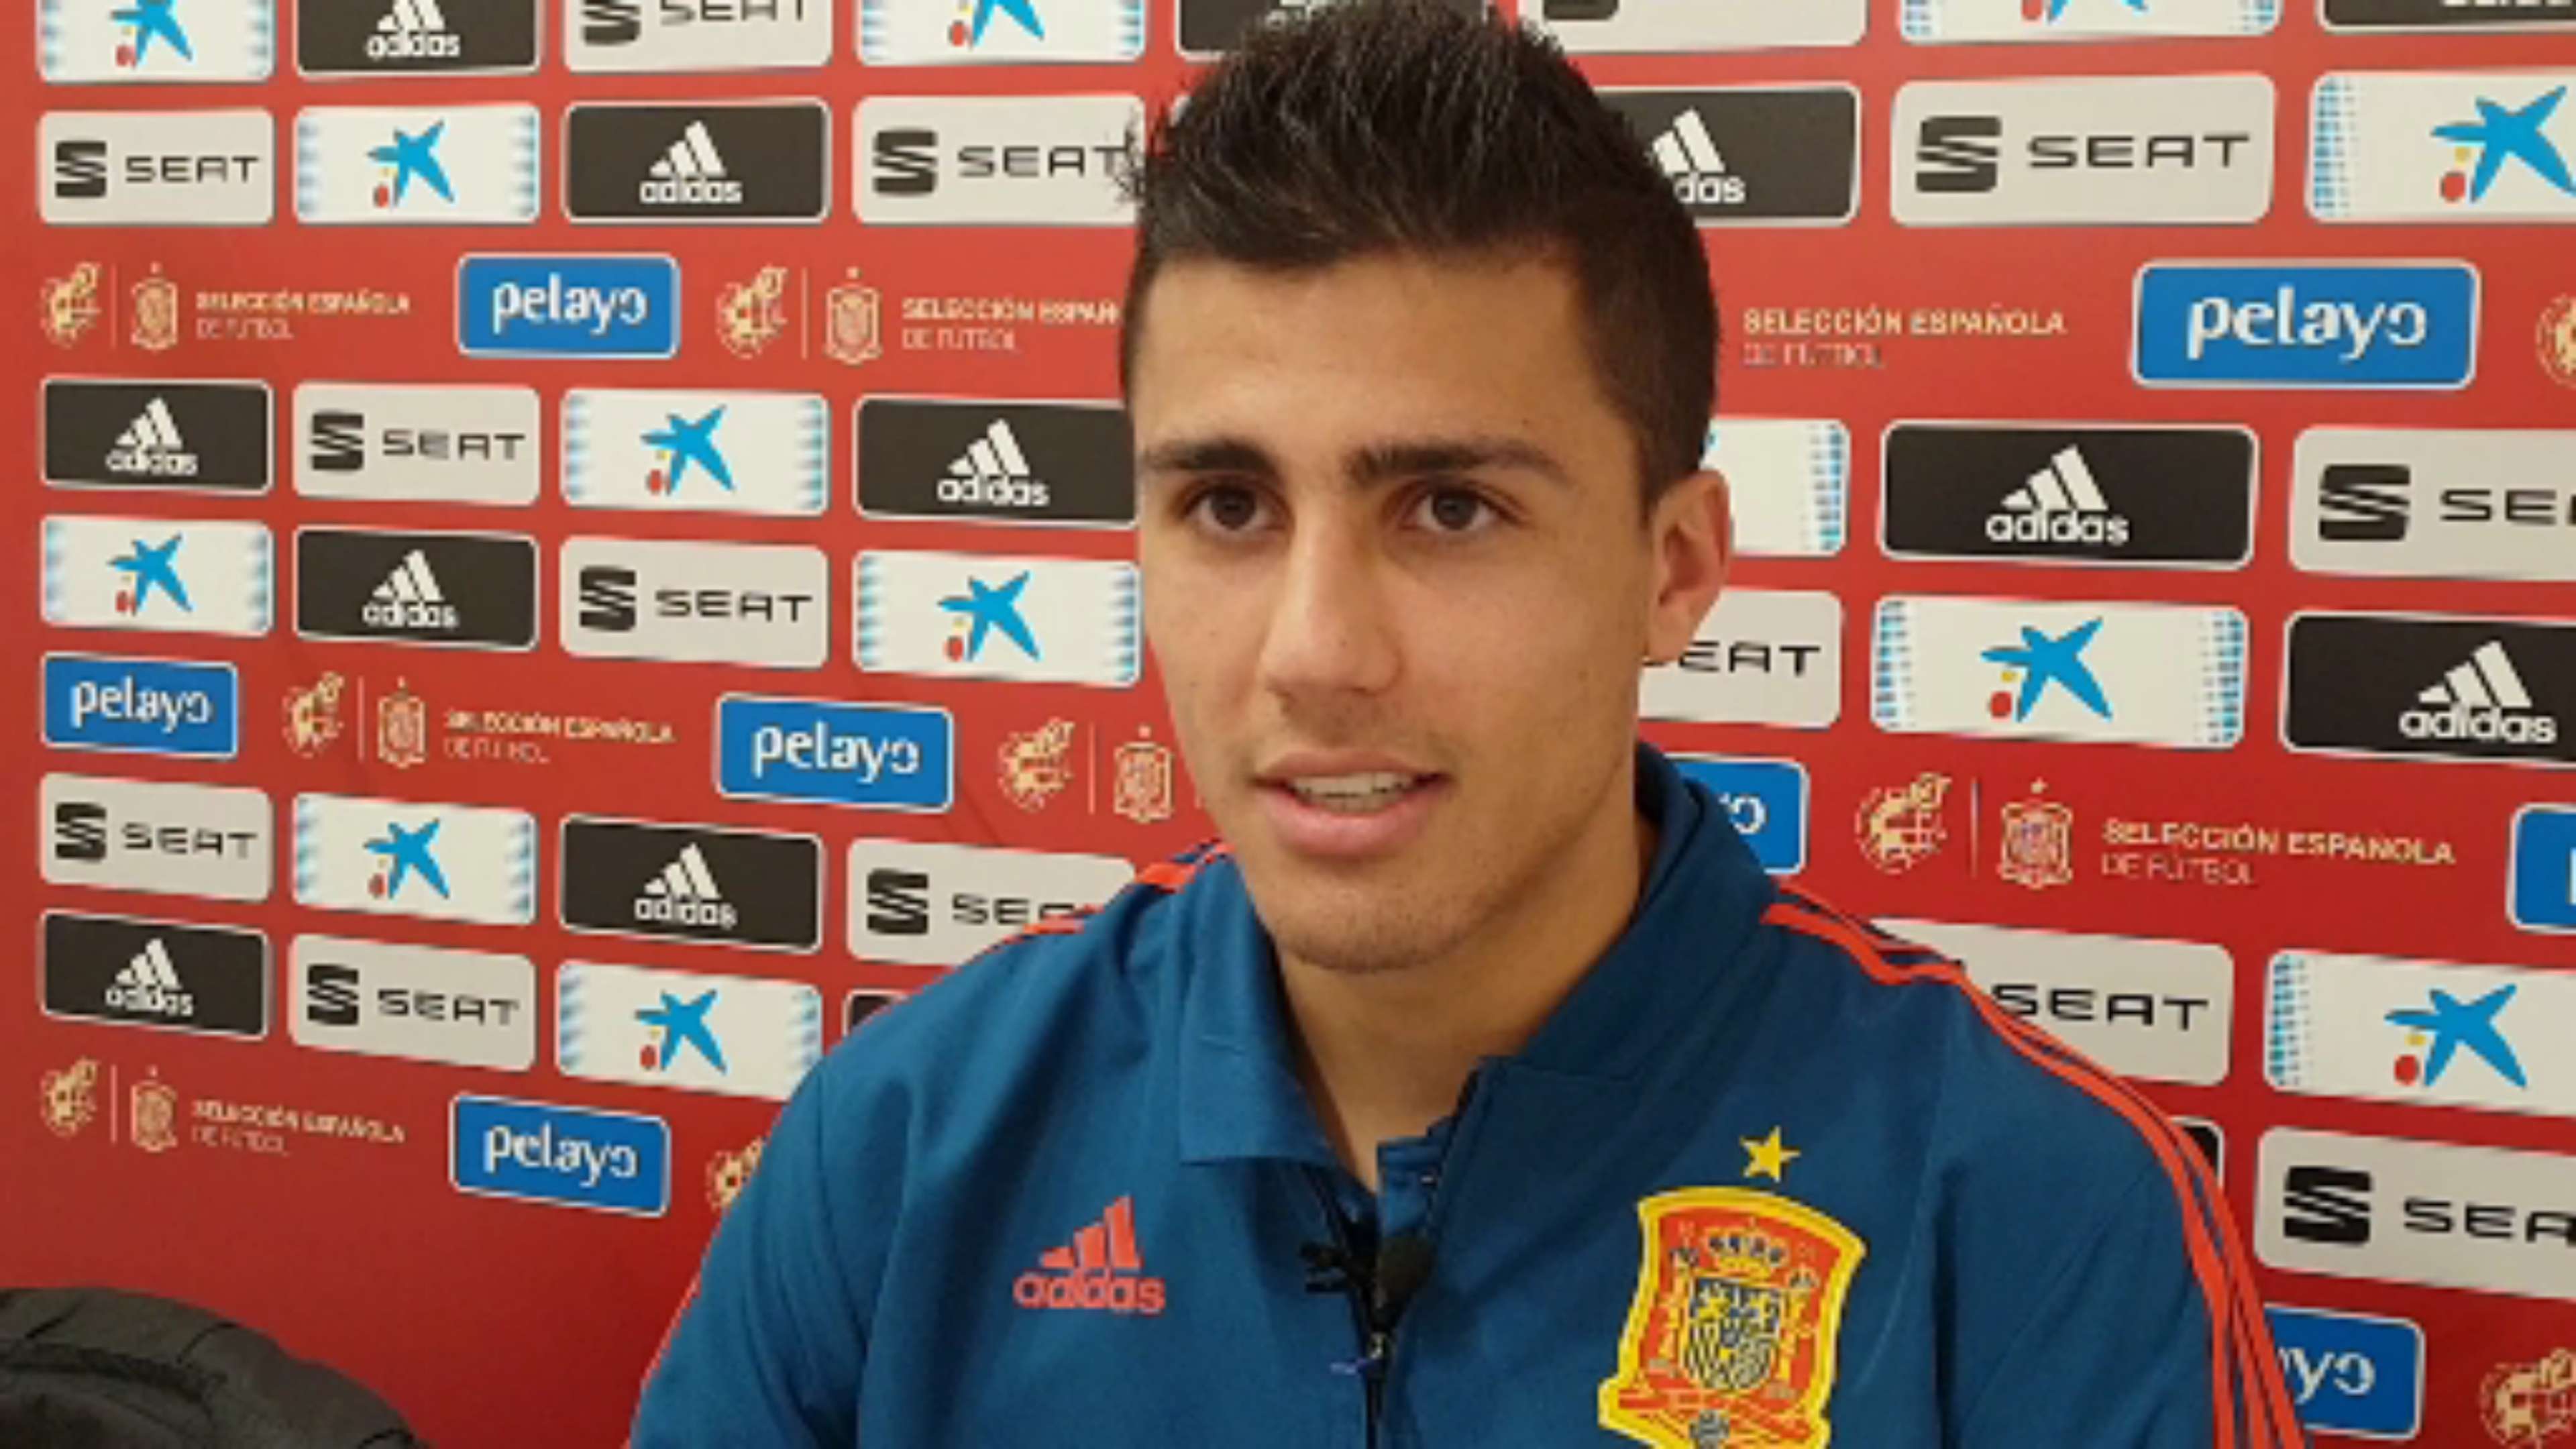 Exclusive interview with Rodri Hernandez, Atletico and Spain player